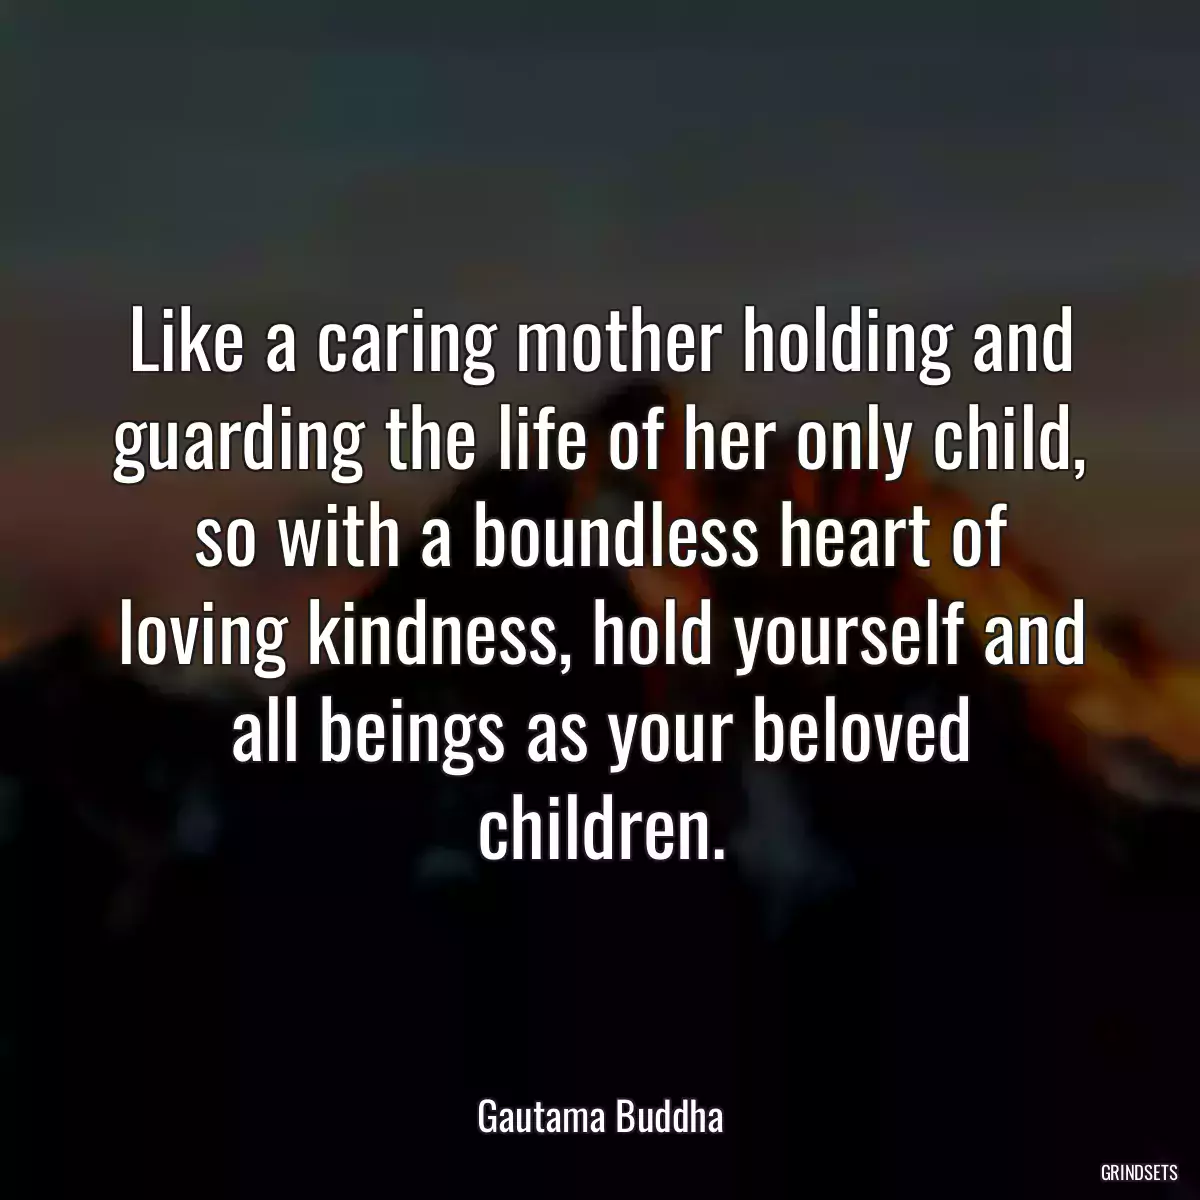 Like a caring mother holding and guarding the life of her only child, so with a boundless heart of loving kindness, hold yourself and all beings as your beloved children.